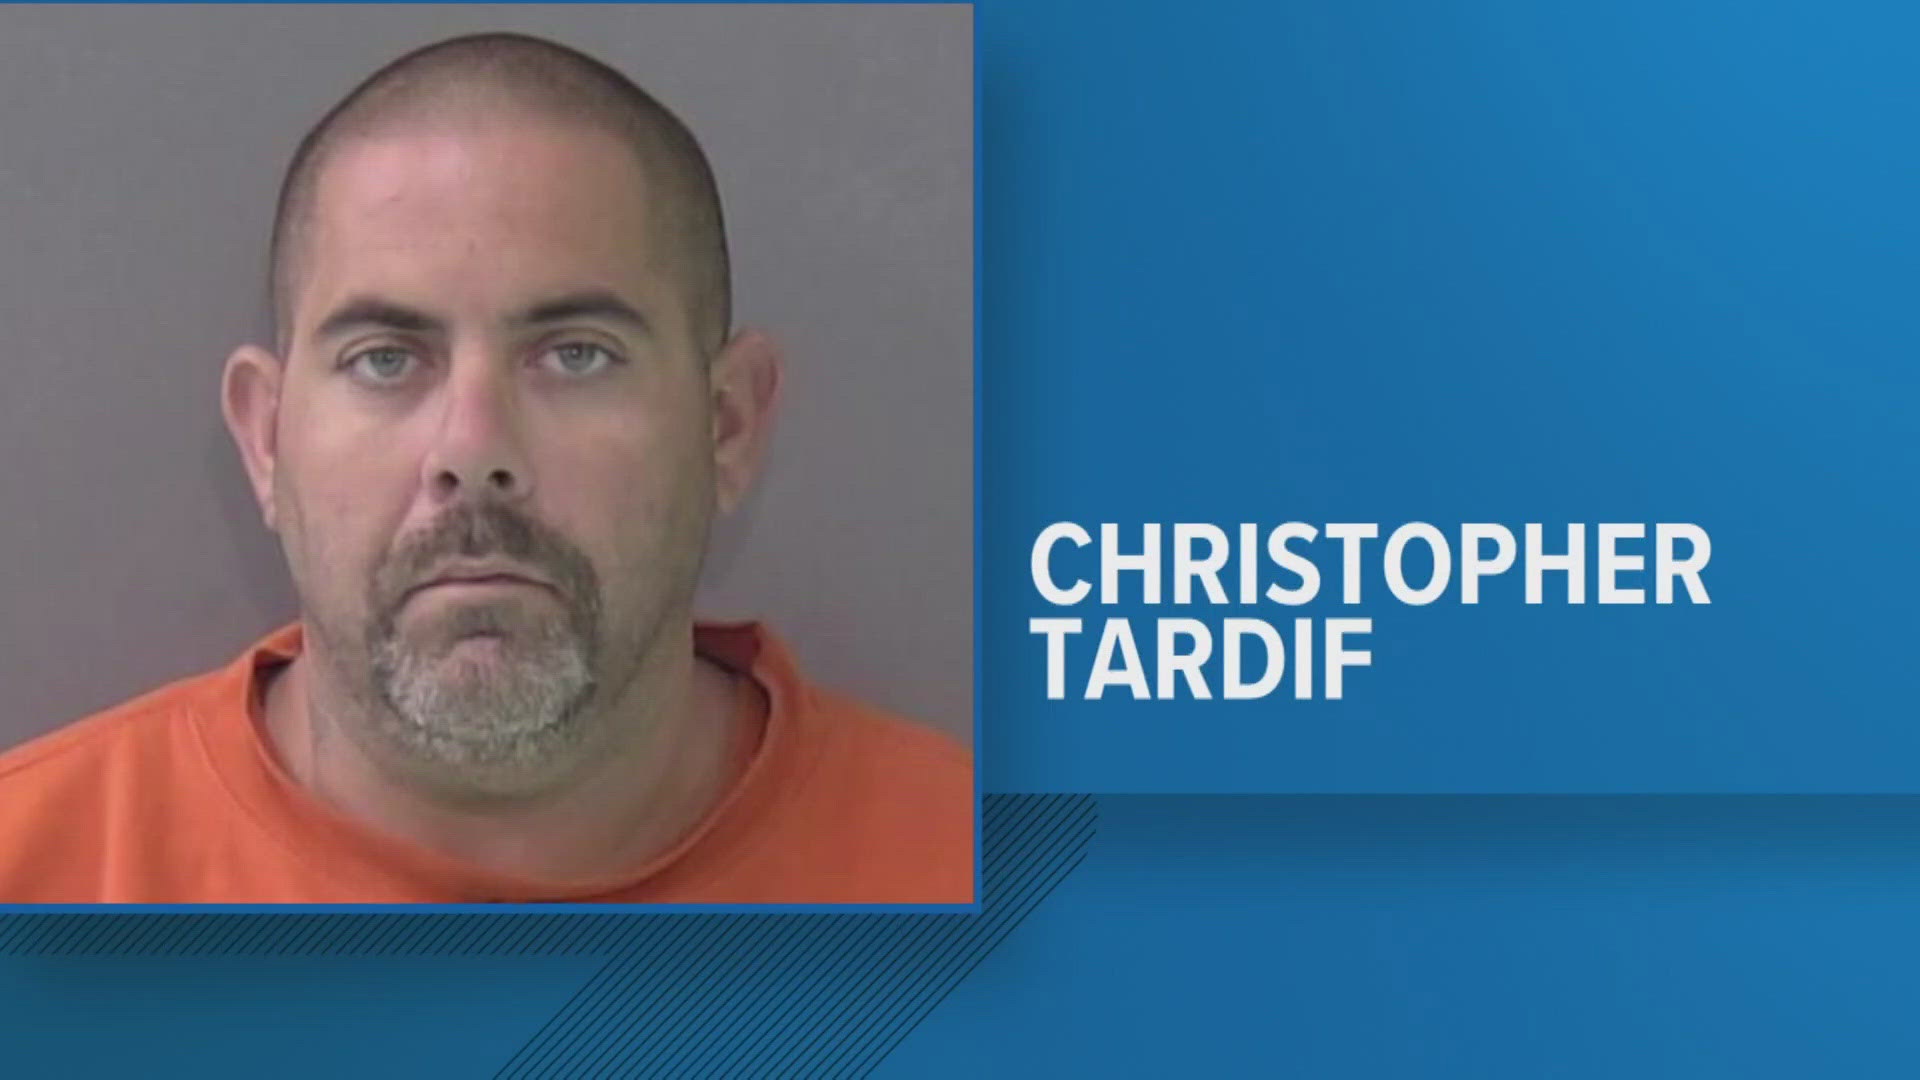 Earlier this month, an indictment by a Bell County Grand Jury was handed down against Christopher Tardif for theft of property.